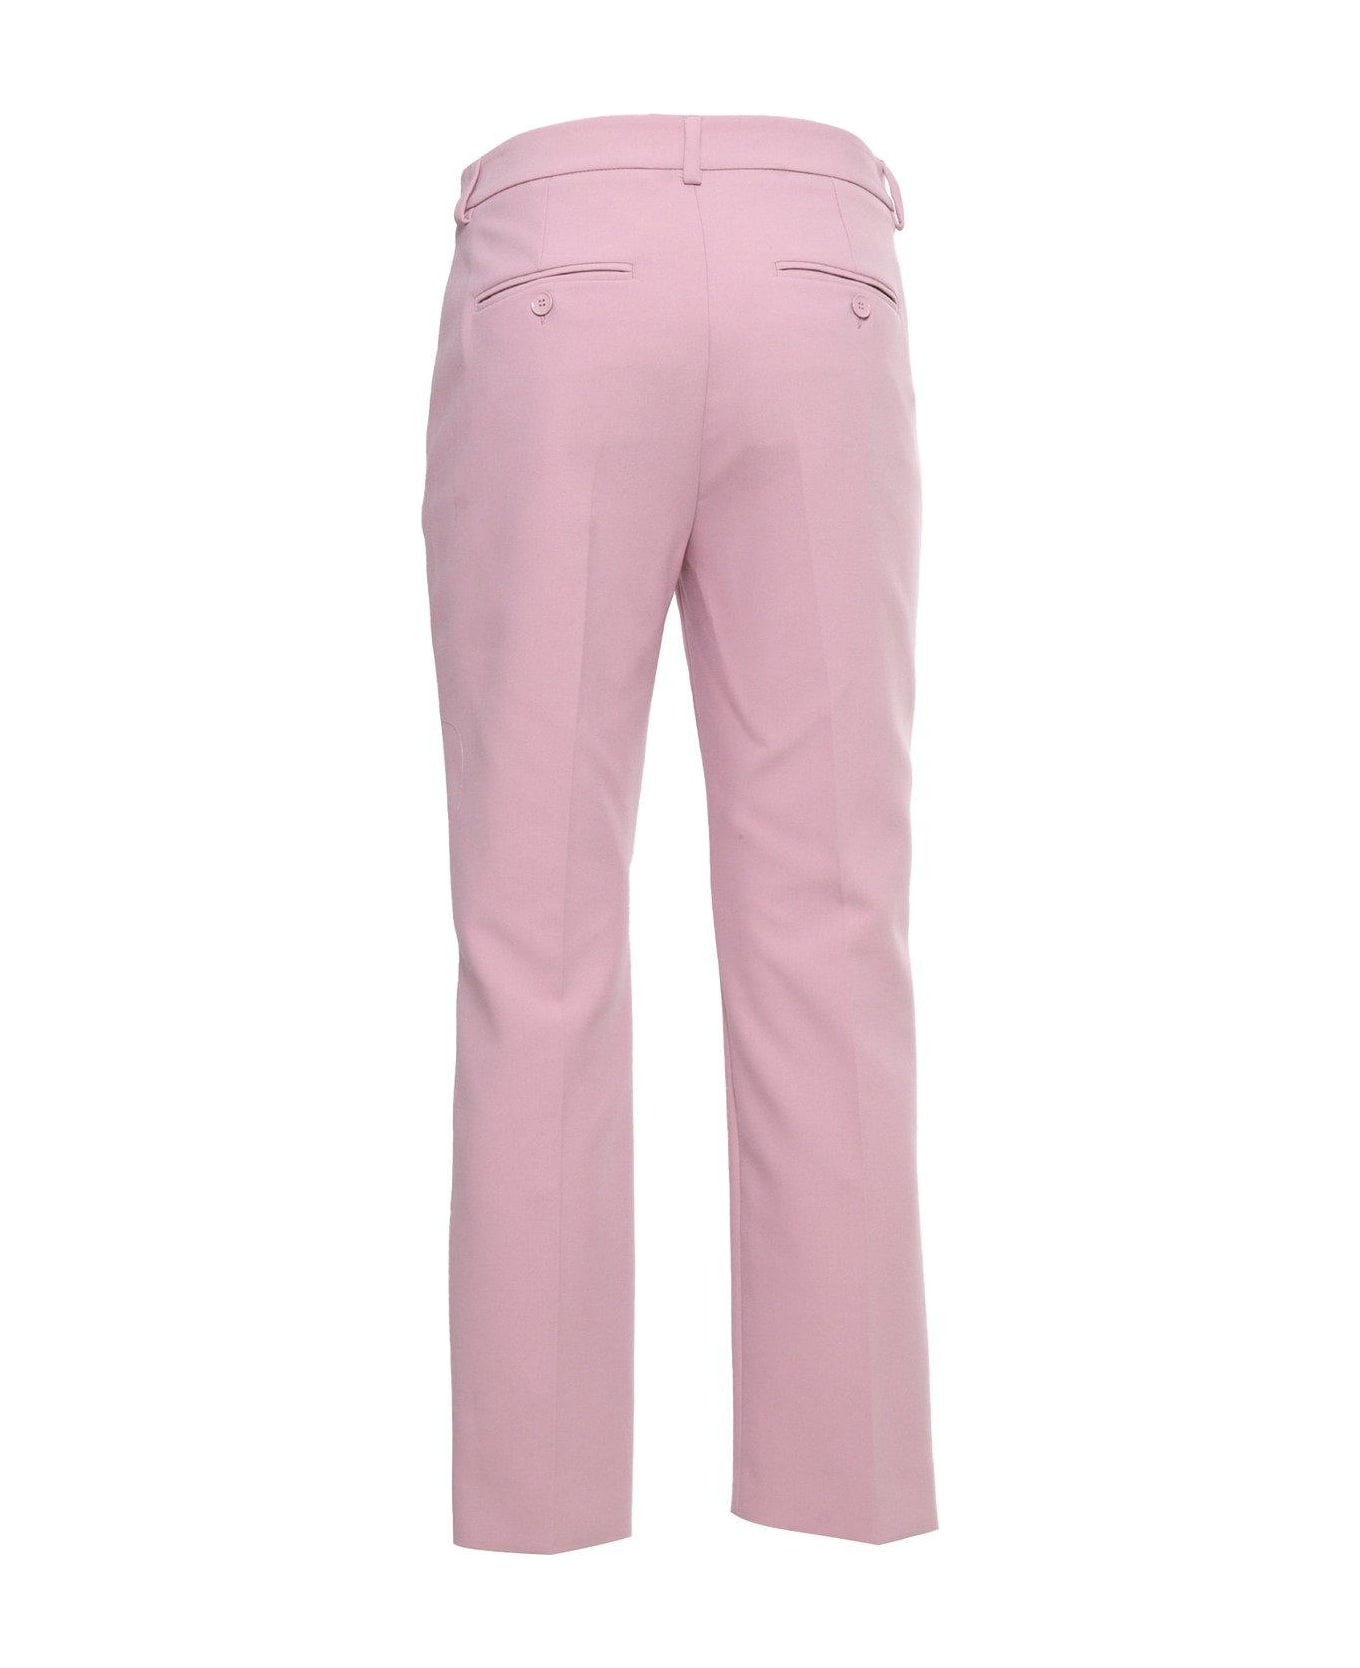 Weekend Max Mara Straight Fit Cropped Trousers - PINK